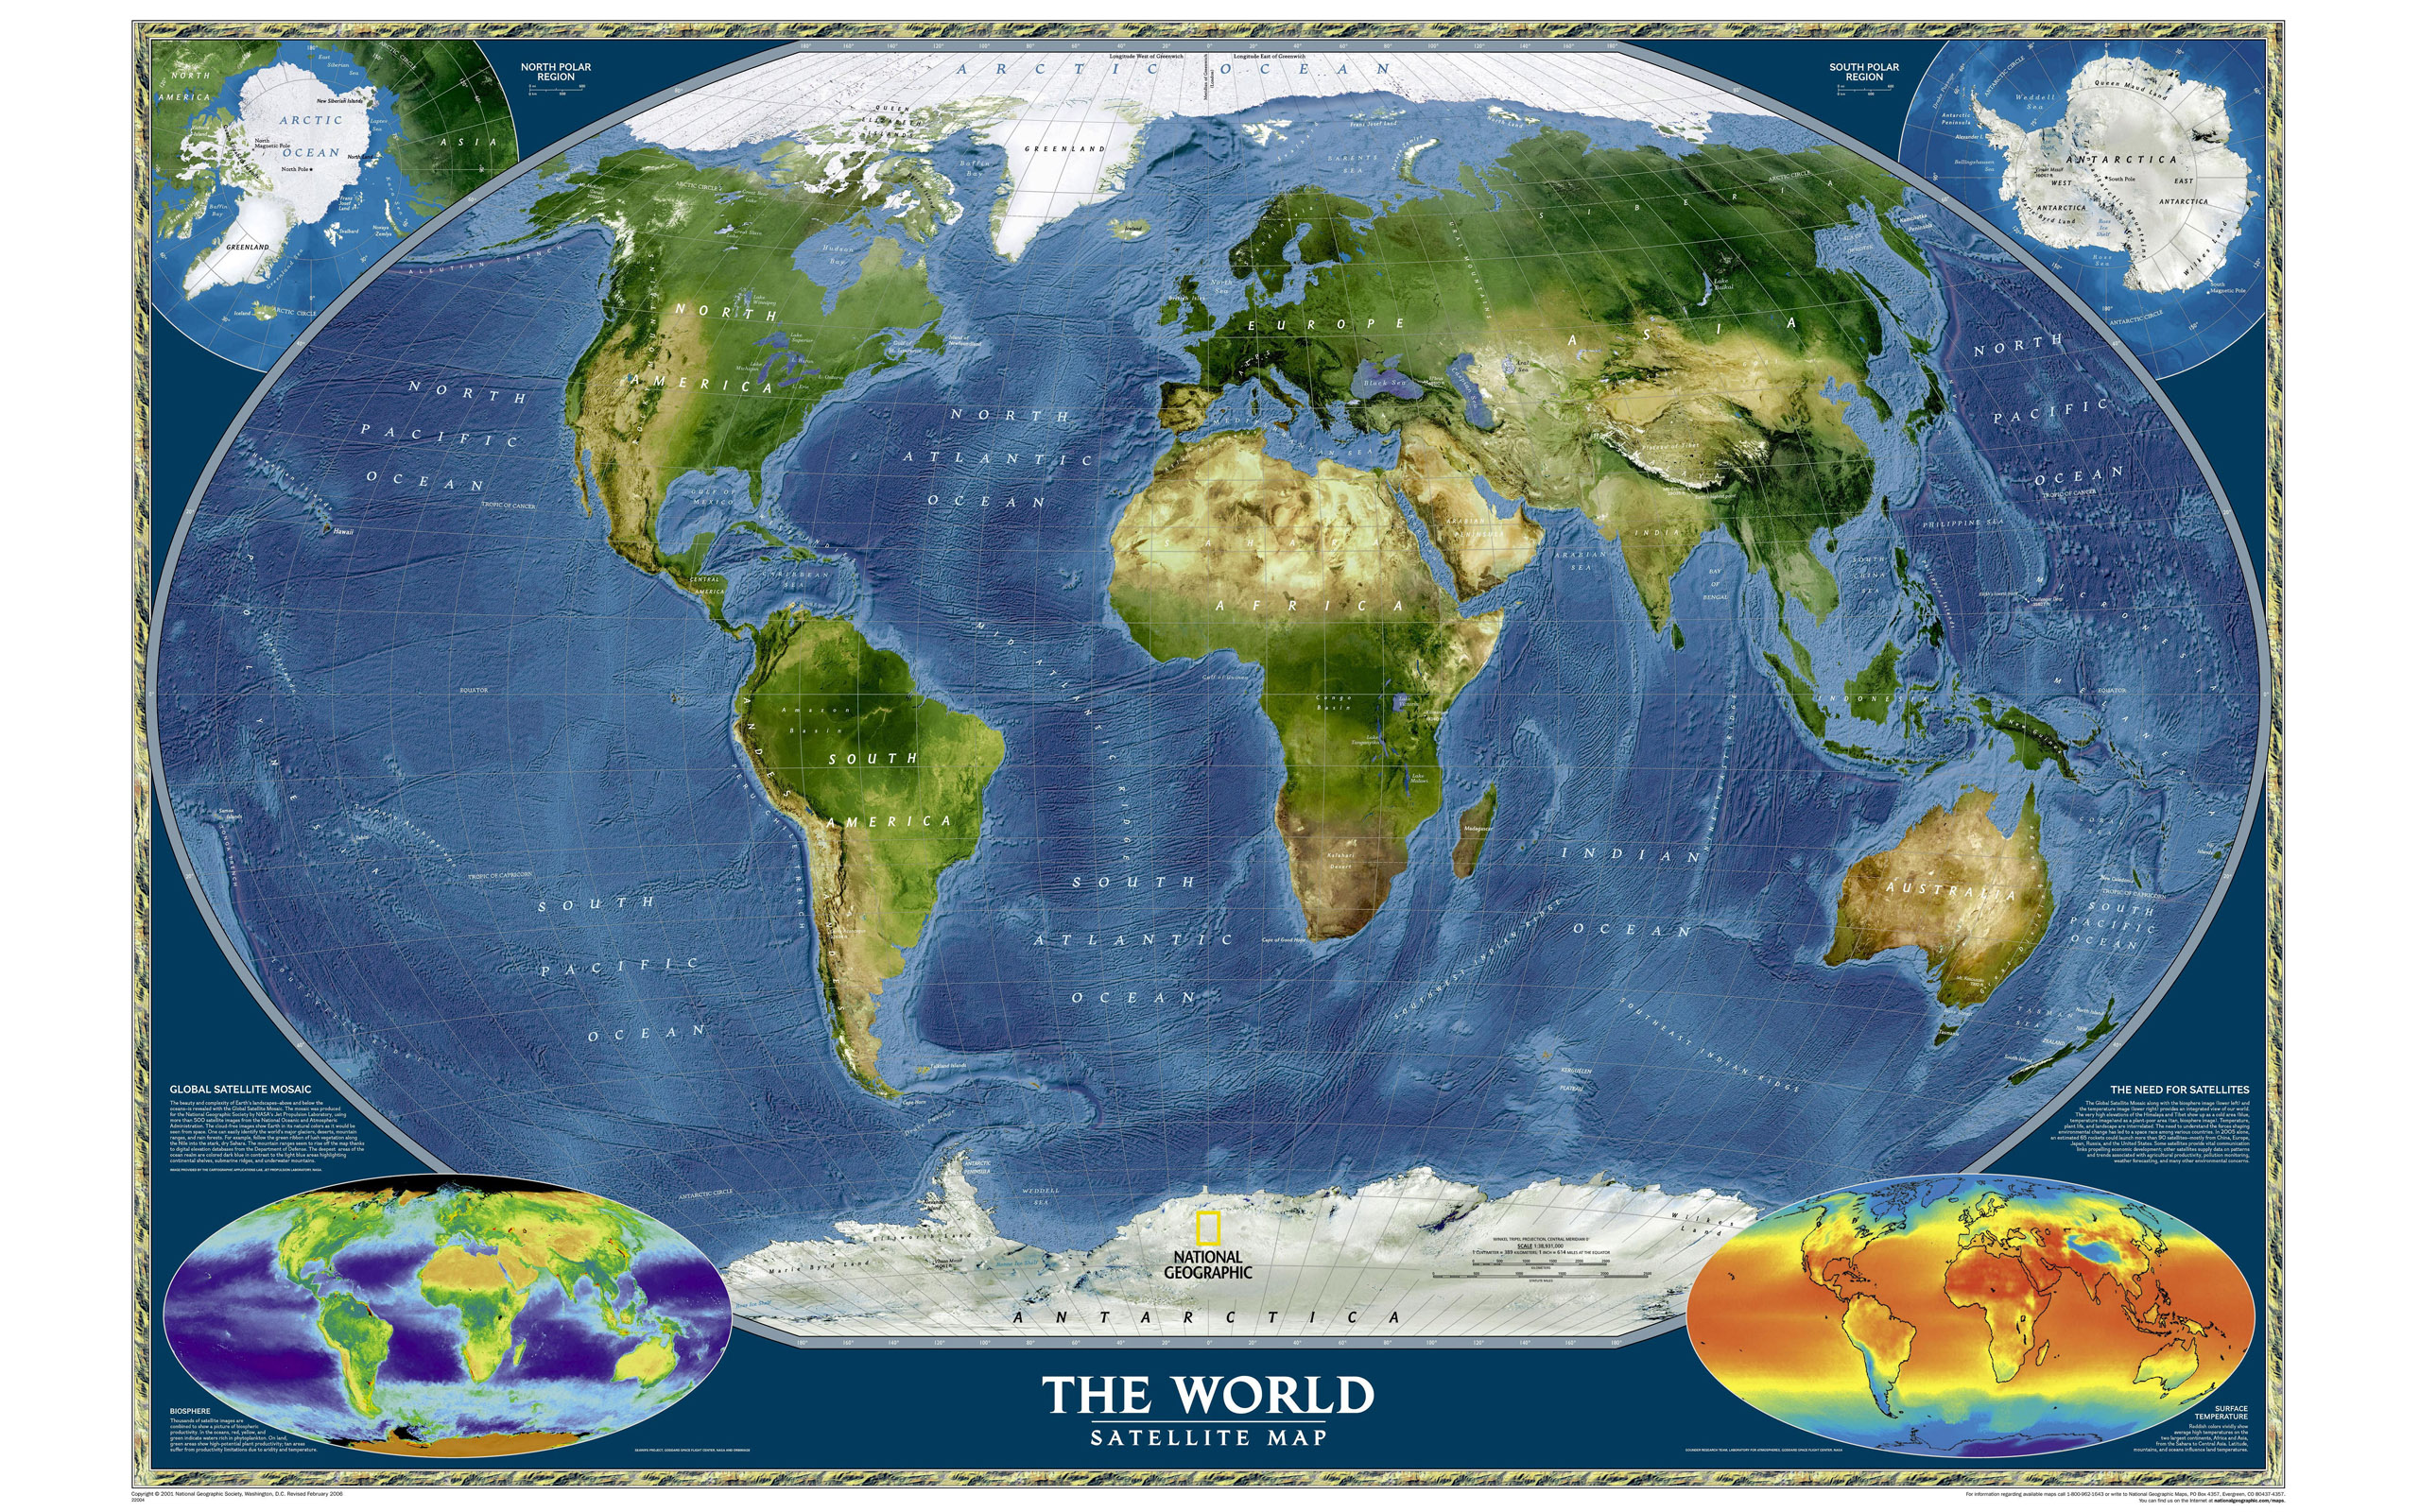 Large World Map - National Geographic Physical Map Of The World - HD Wallpaper 